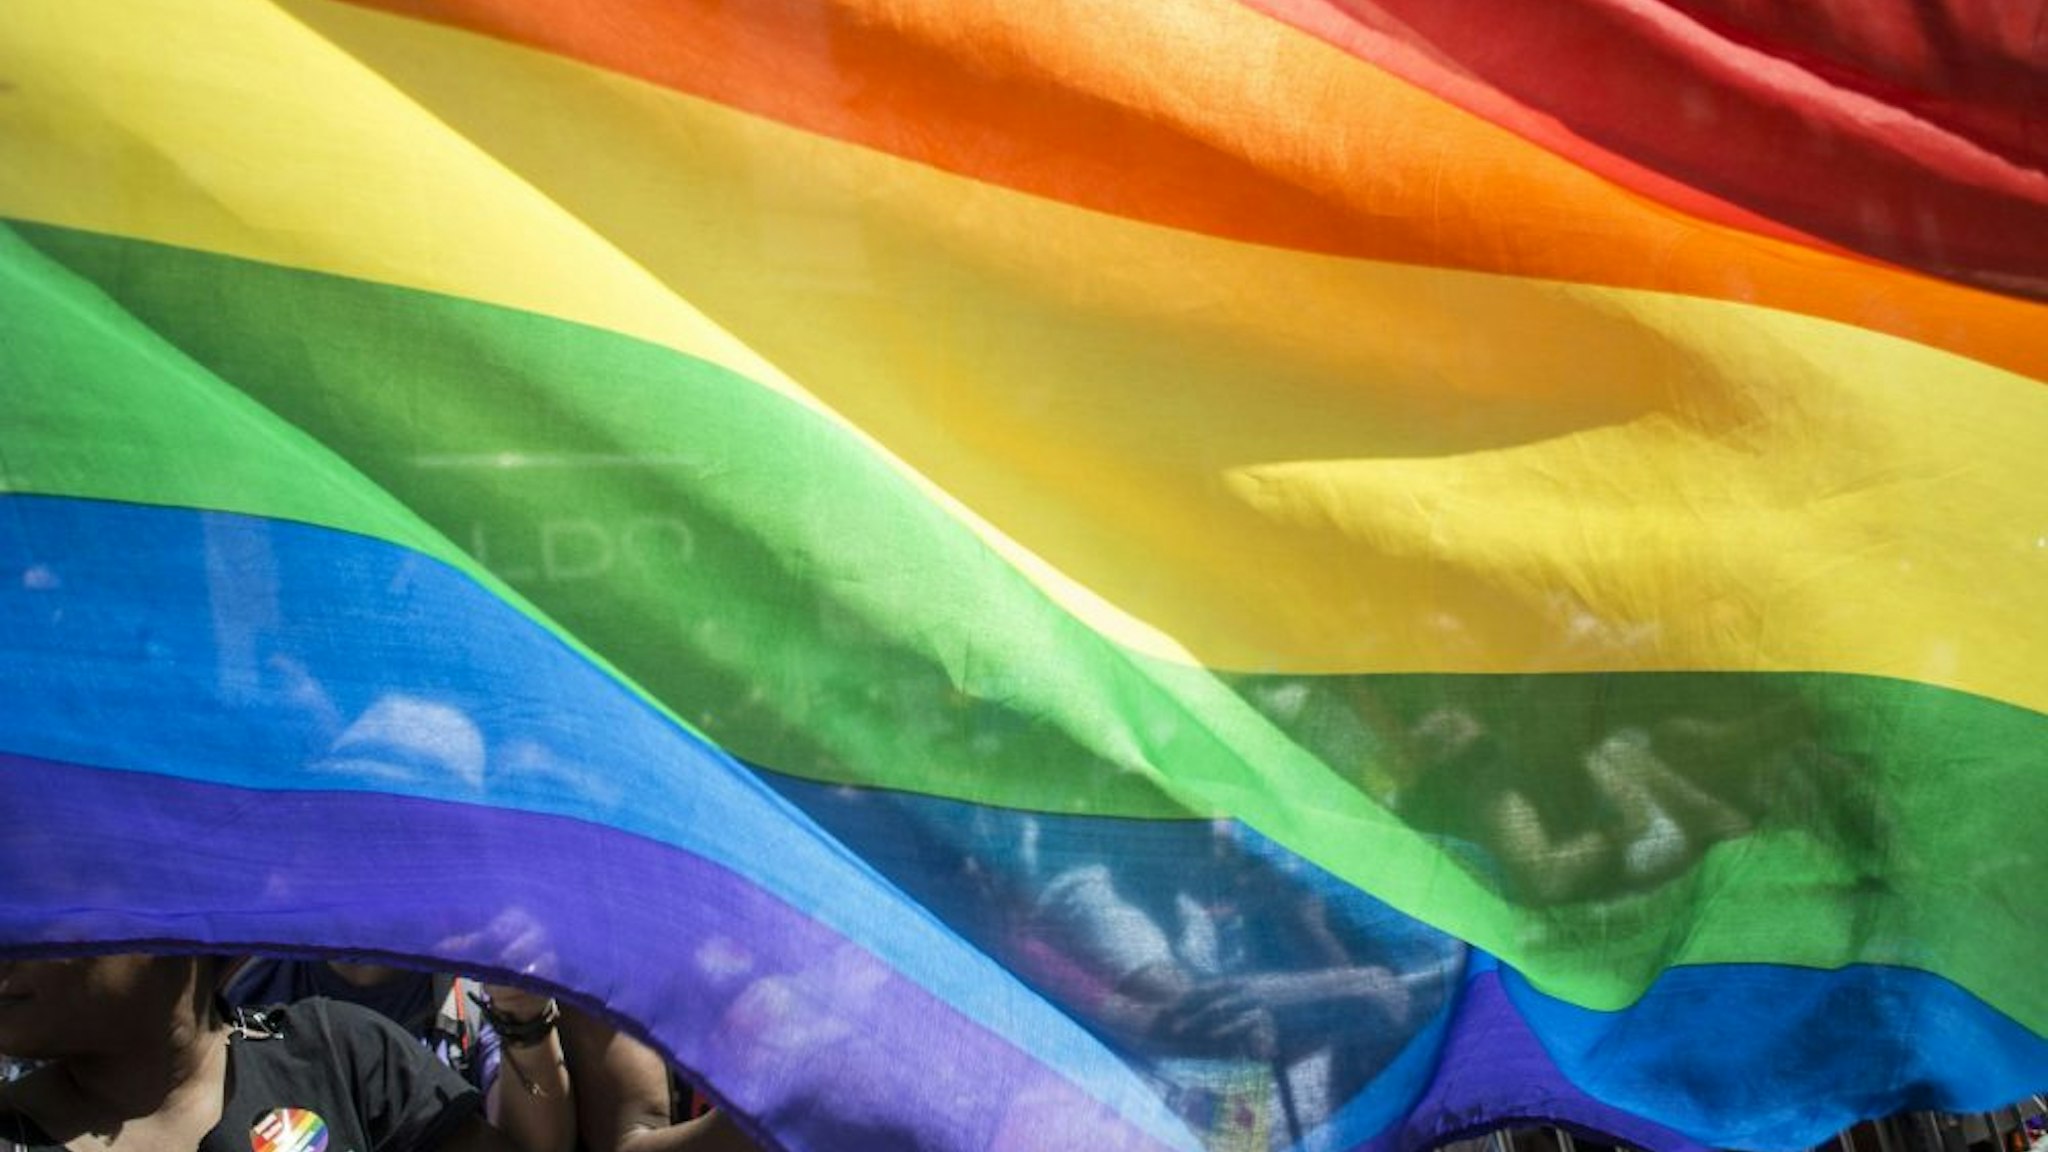 NEW YORK, NY - June 30: LGBT flag during the Gay Pride Parade on June 30, 2019 in New York City.